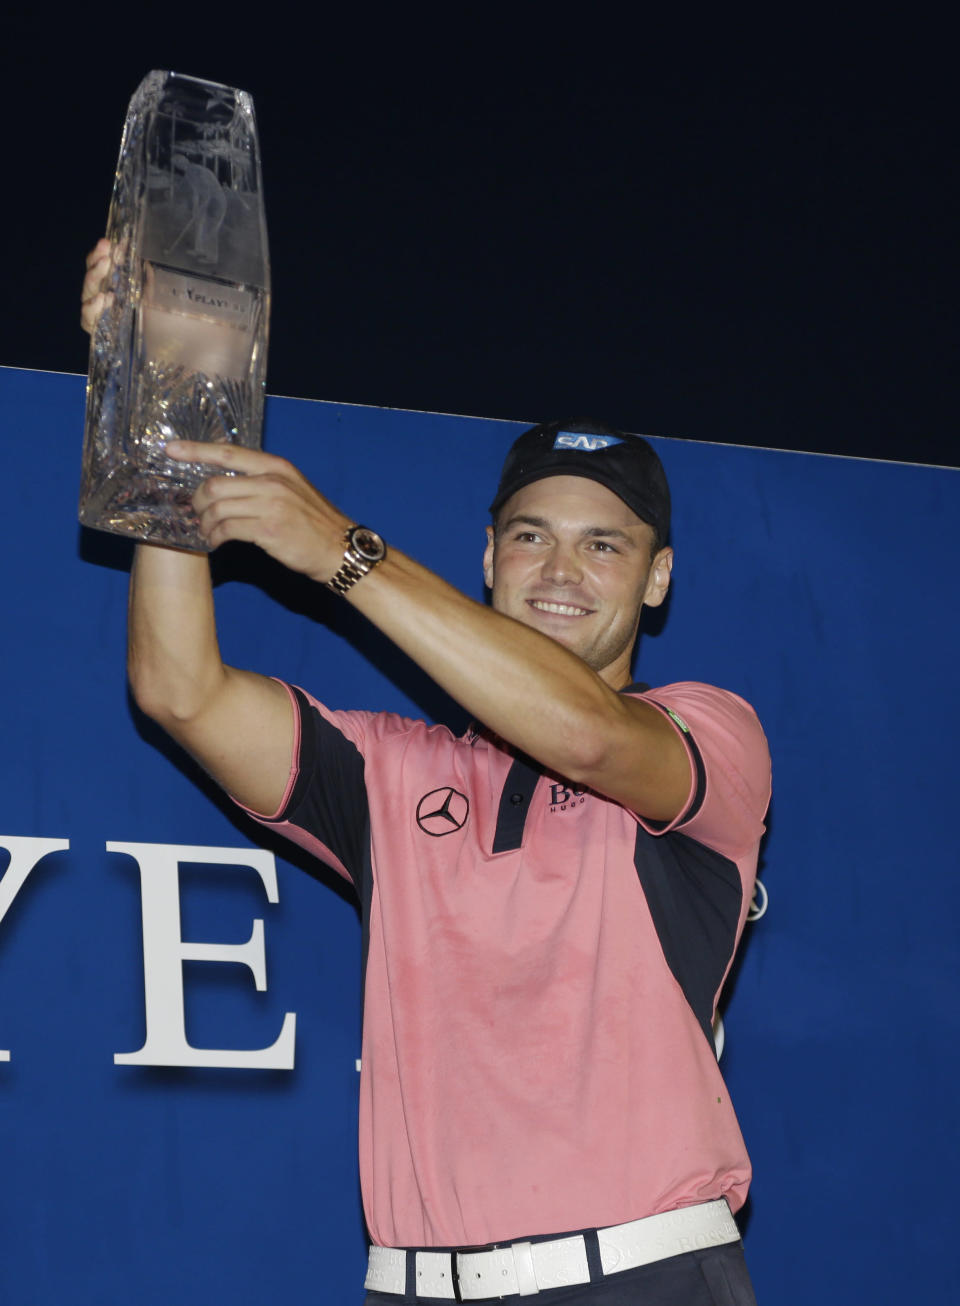 Martin Kaymer of Germany, lifts the The Players championship trophy TPC Sawgrass, Sunday, May 11, 2014 in Ponte Vedra Beach, Fla. (AP Photo/Lynne Sladky)